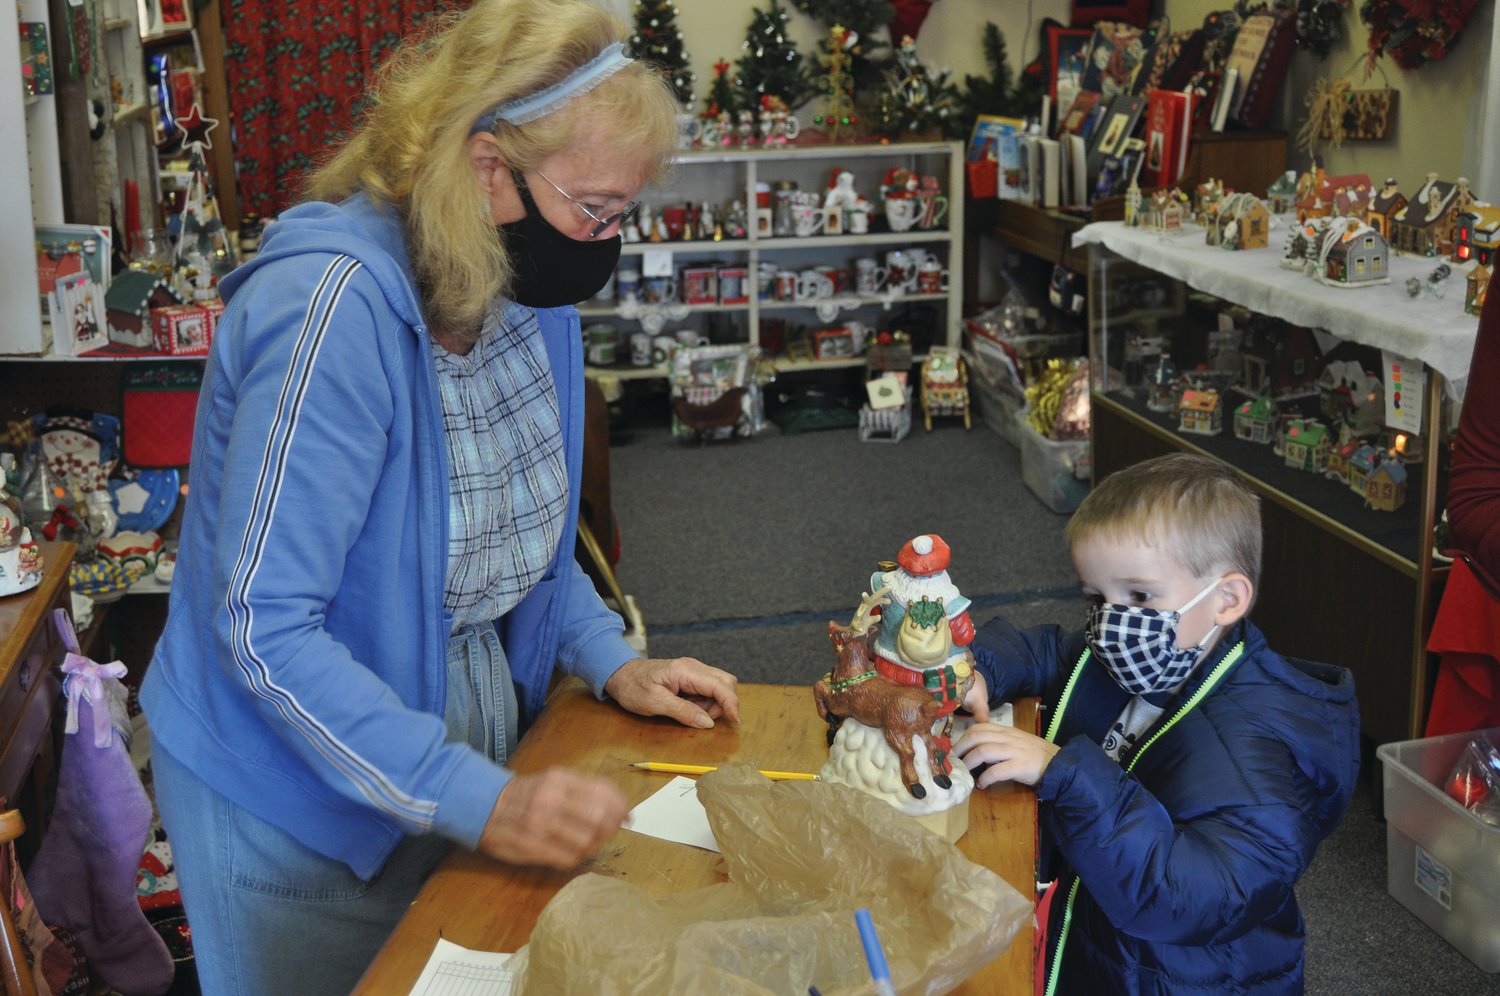 D.J. Alexander, 4, looks at a music box as Dee Isenberg waits to wrap it at the Christmas Shop on Friday. The shop raises money to provide food certificates to local families.